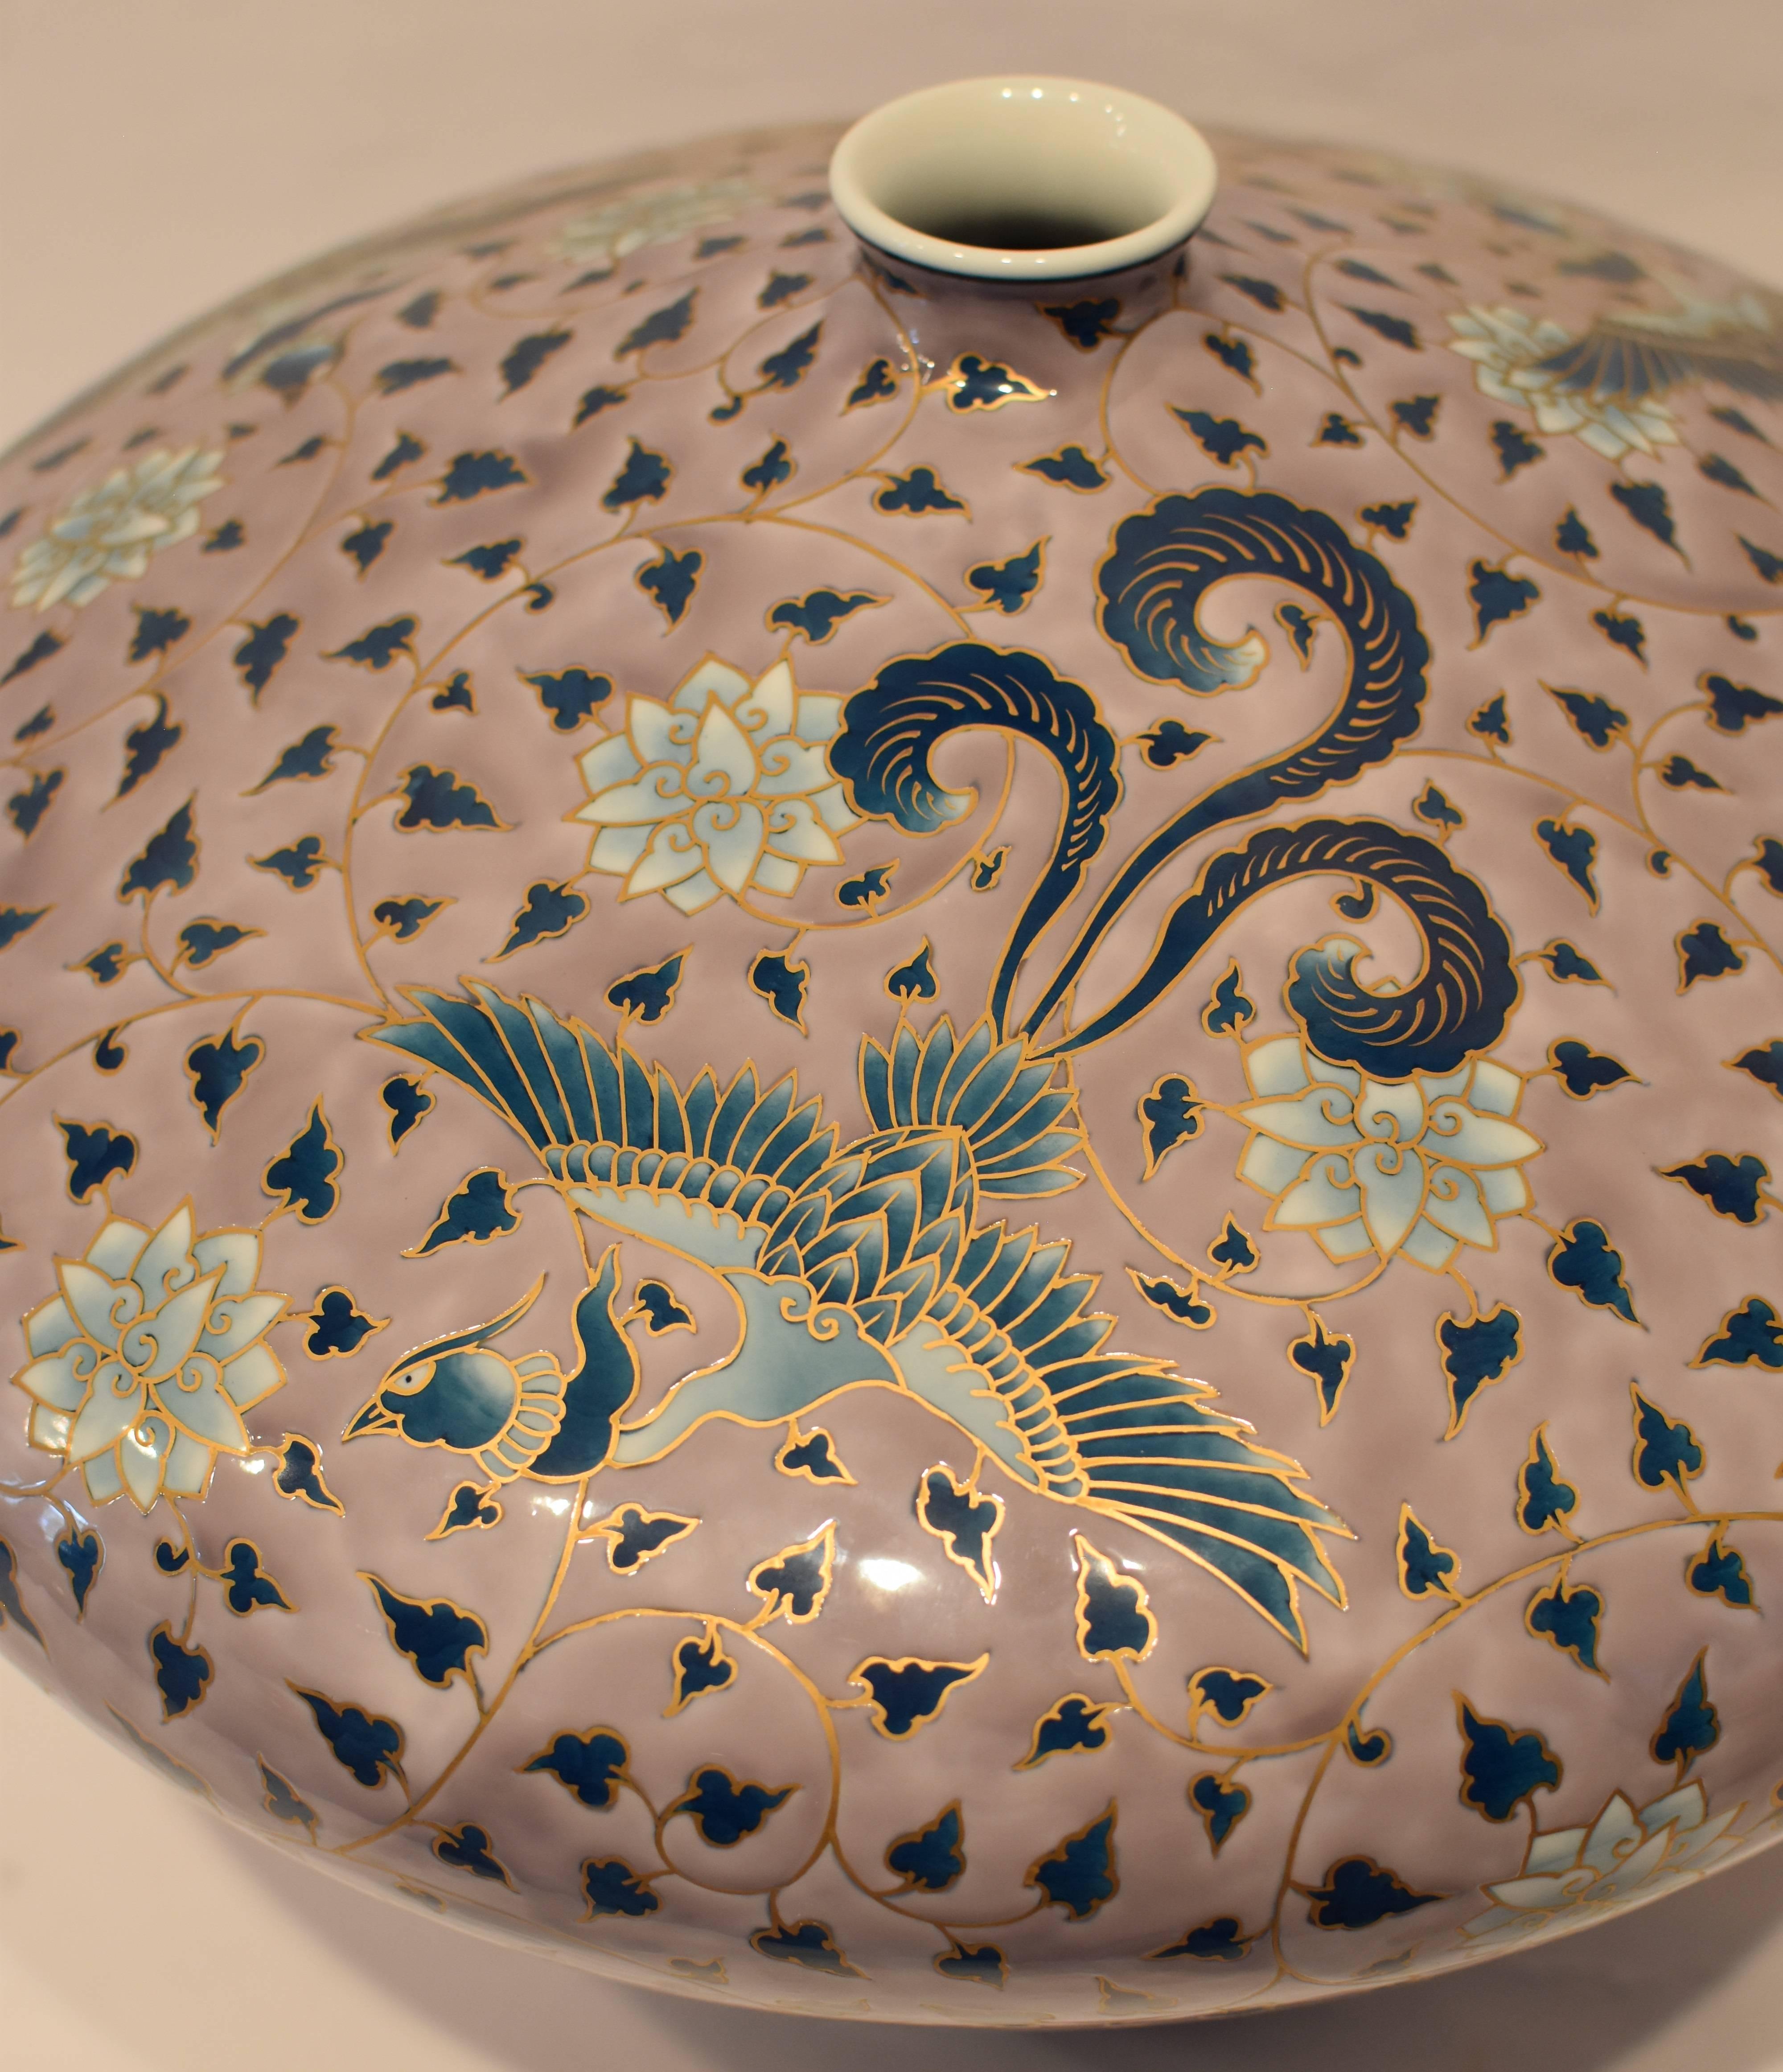 This exquisite one-of-a-kind contemporary Japanese vase, hand-painted on fine Arita porcelain is a stunning soft purple color, comes in an unusual “diamond” shape. The entire body is covered with an arabesque motif interspersed with phoenixes and